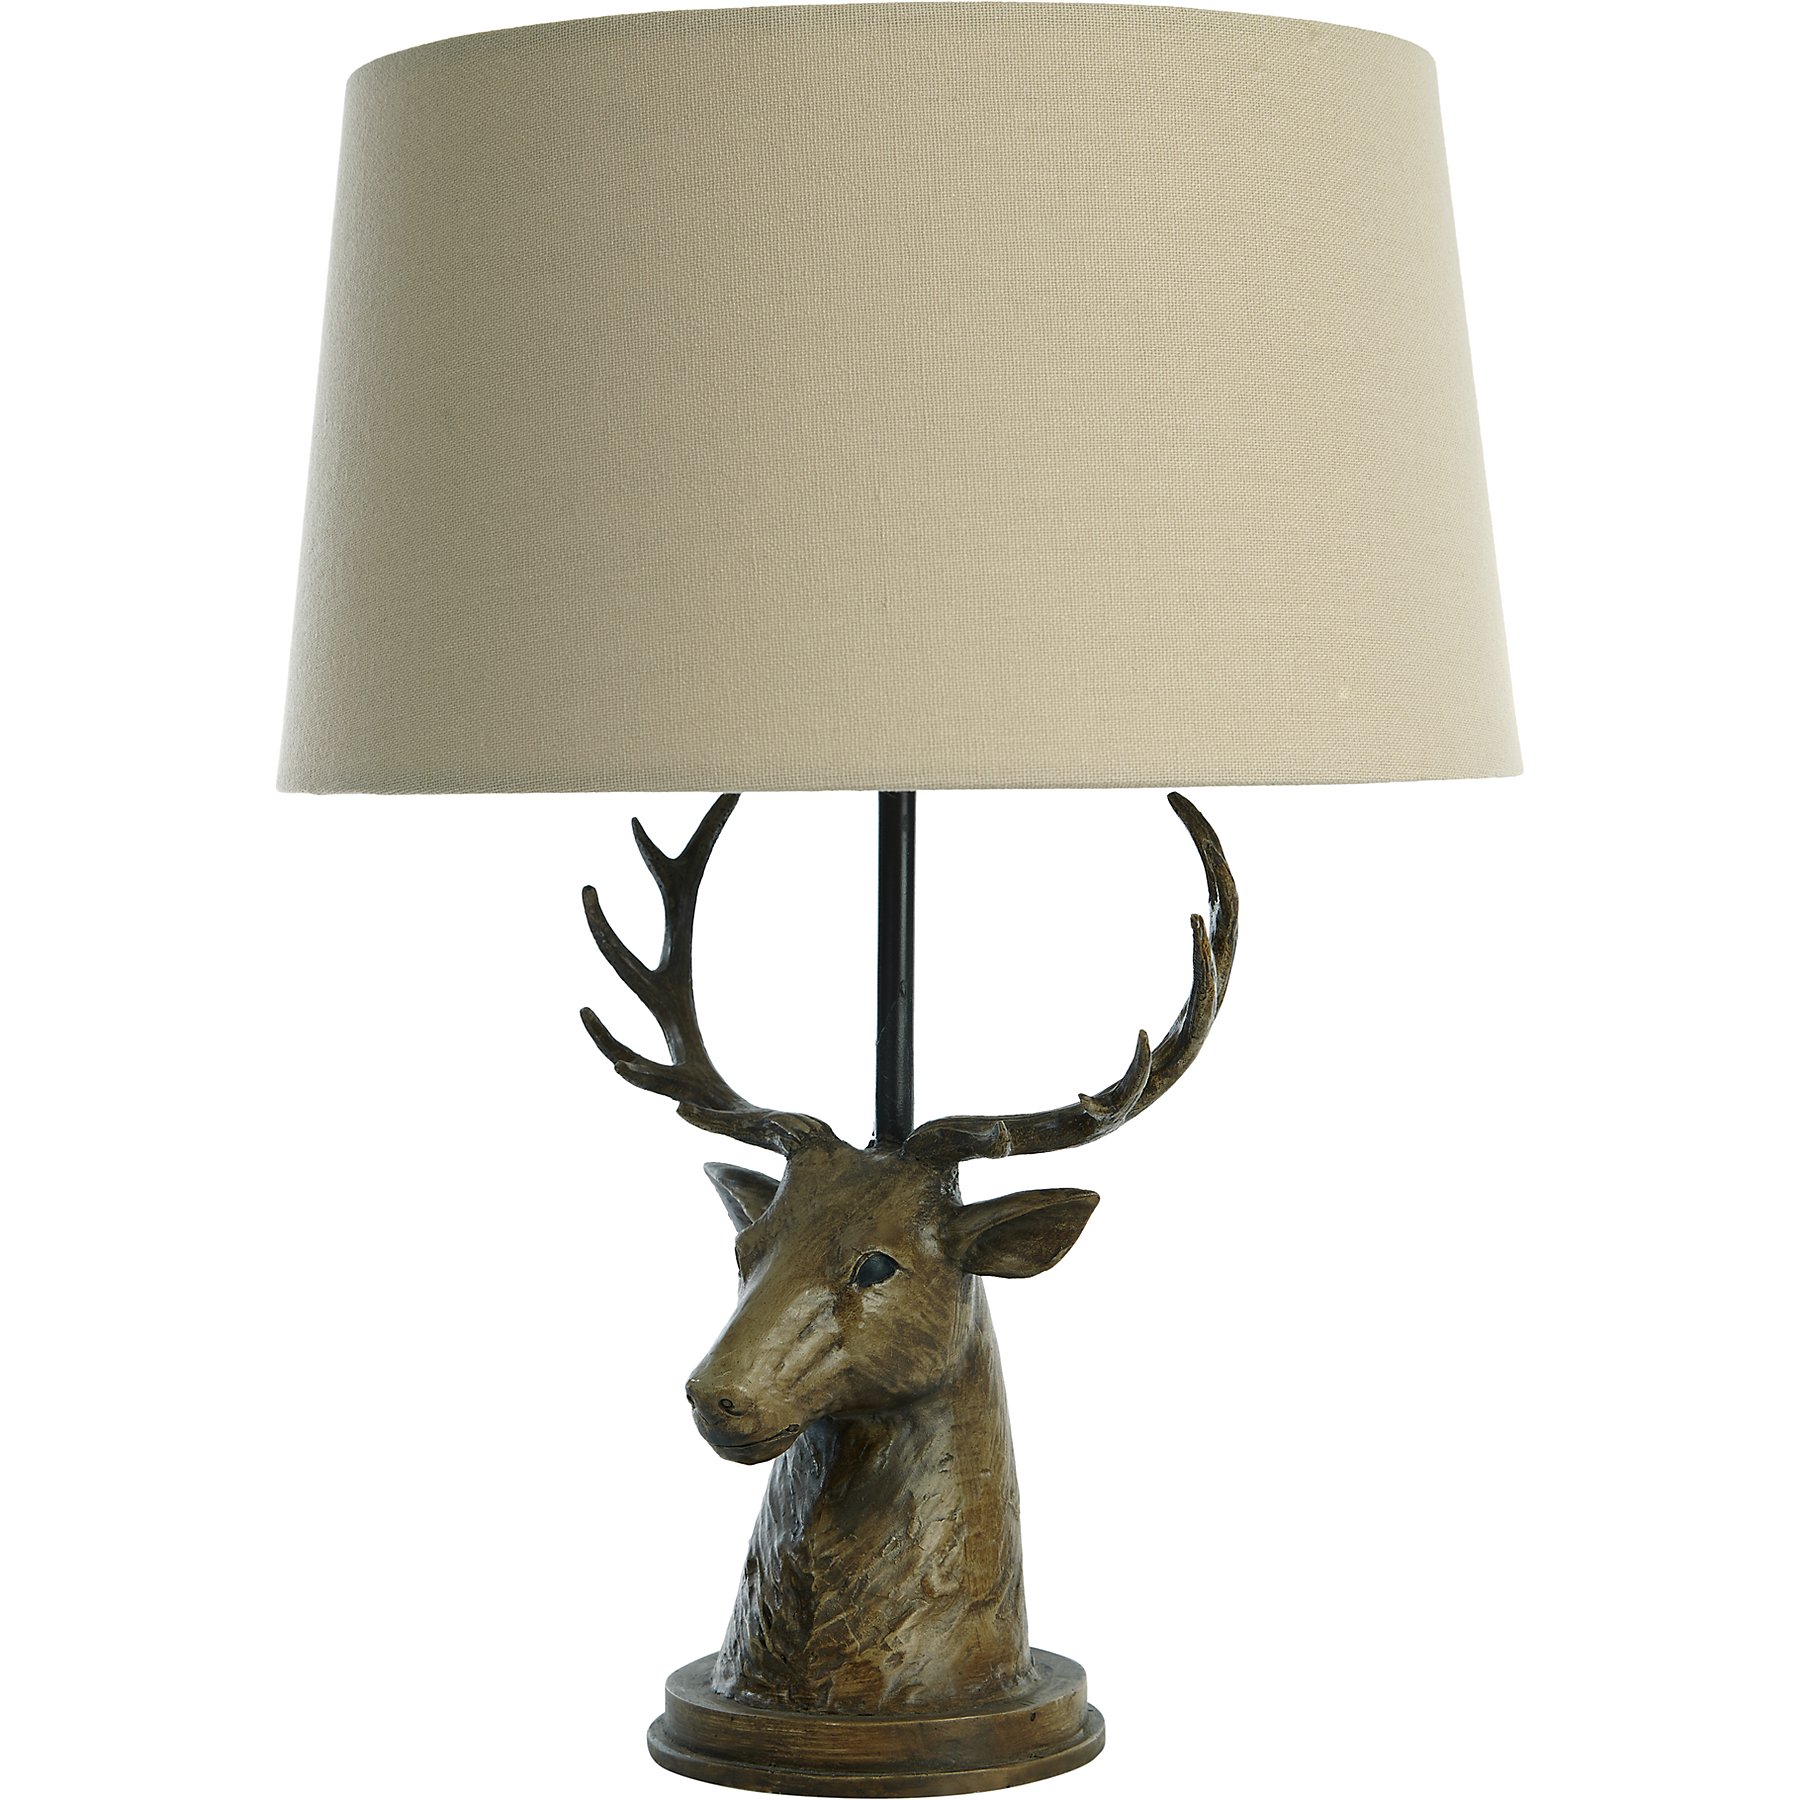 Stag lamp